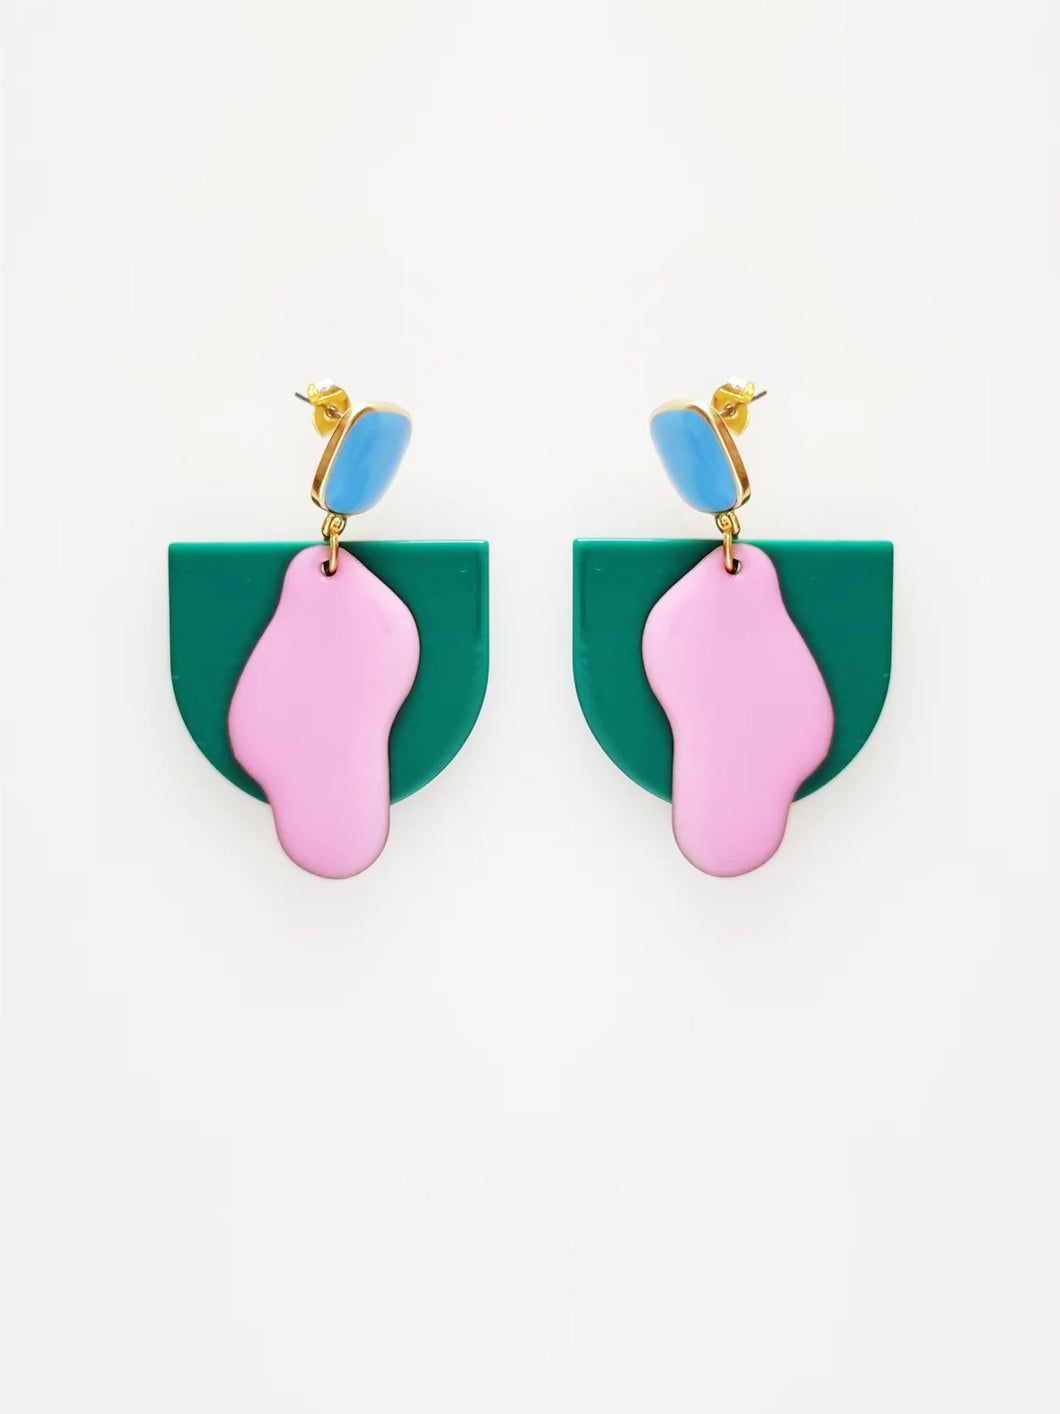 Middle Child Earrings - Parlour - Green - MCS7009